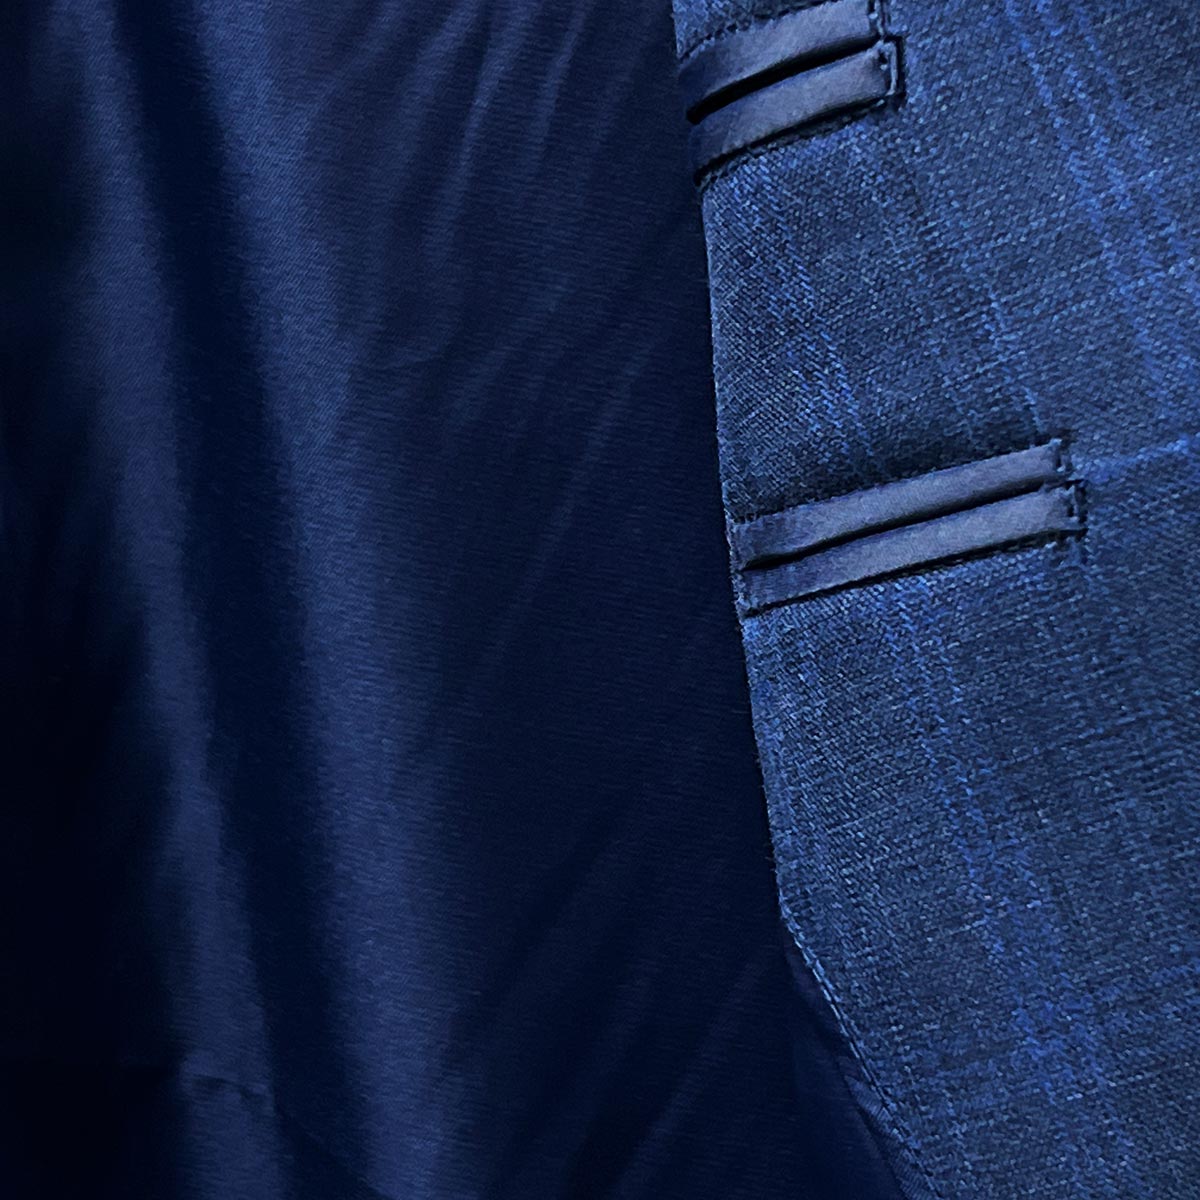 Navy suit inside lining detail.